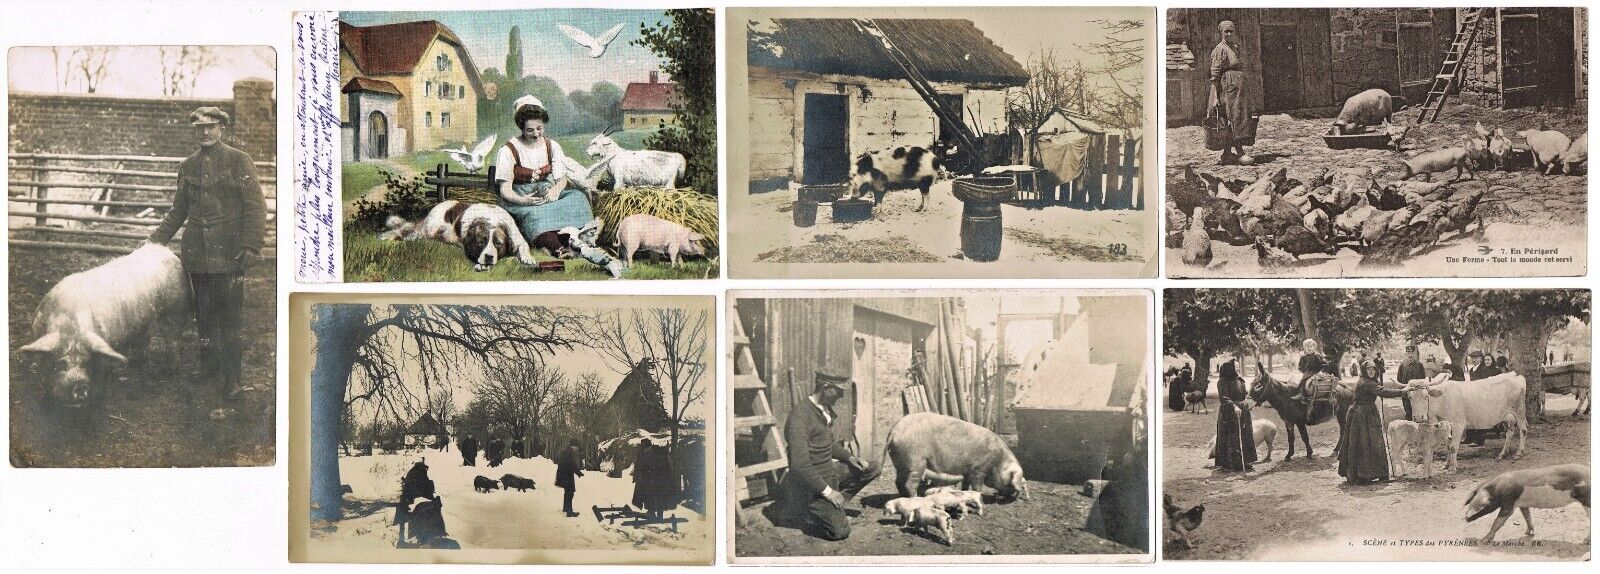 7 old Postcards related to Pigs, mostly French Postcards.